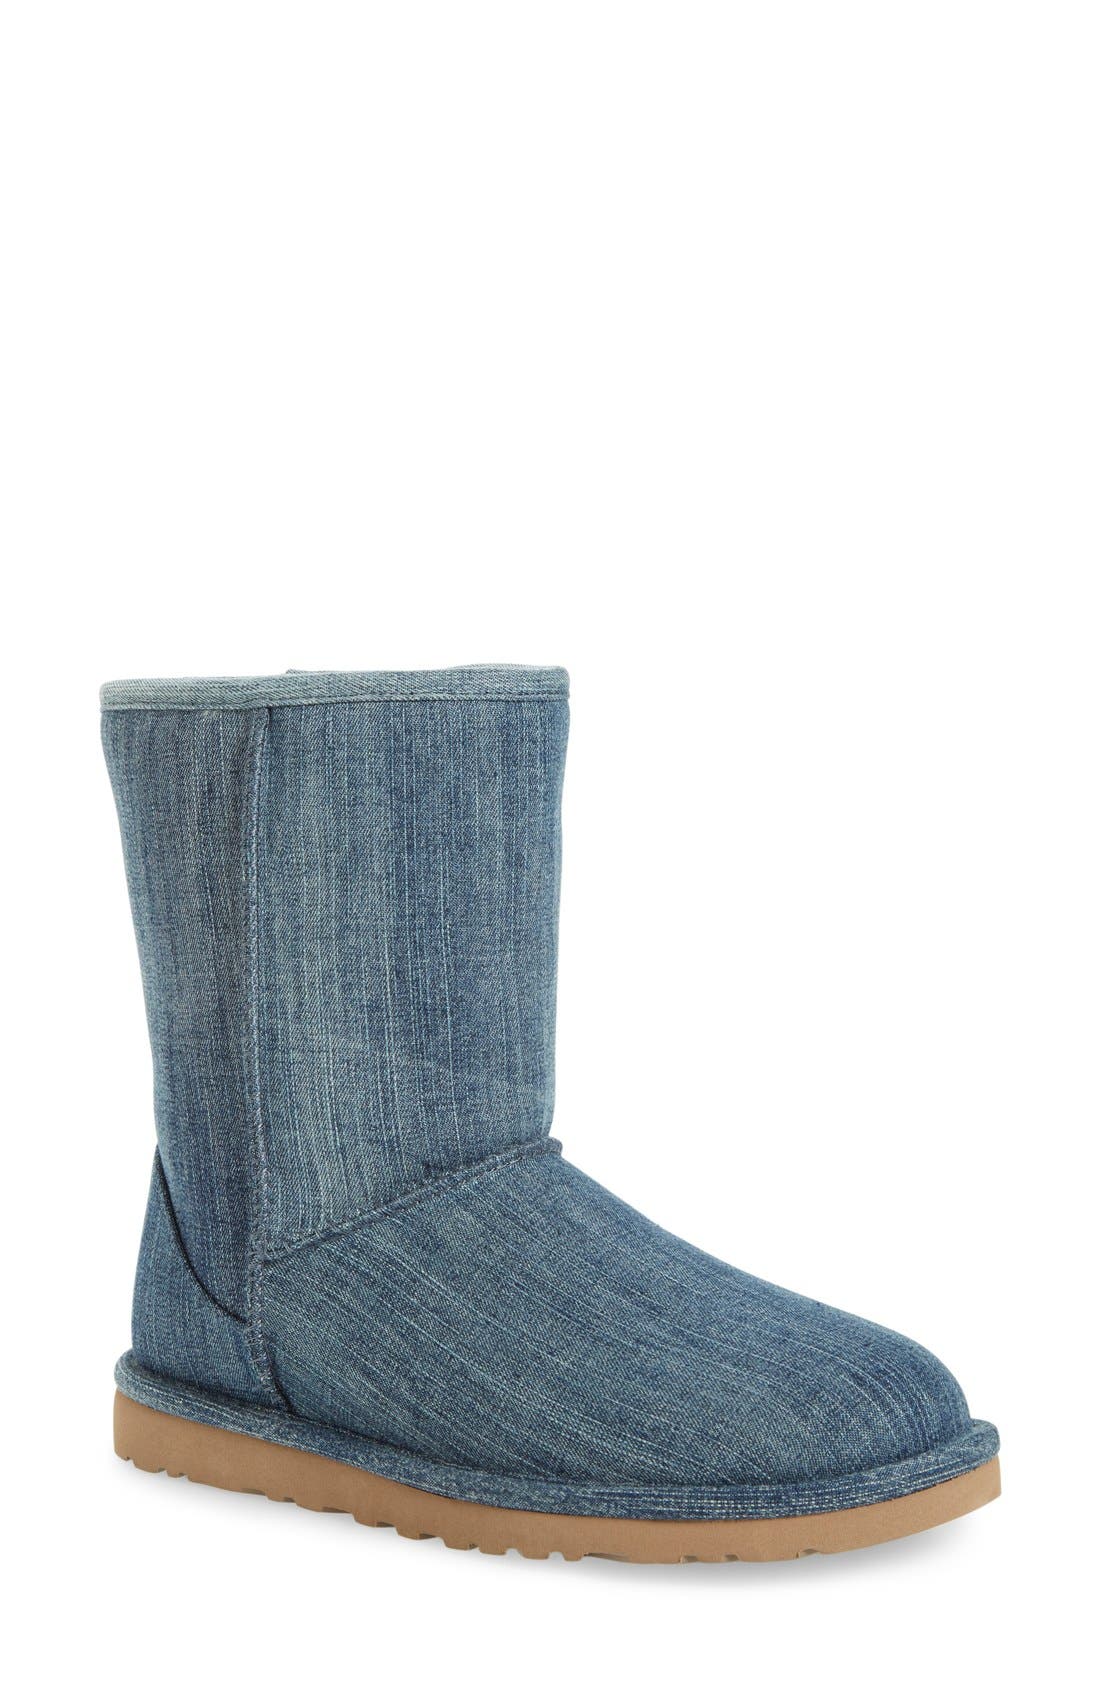 blue jean ugg boots